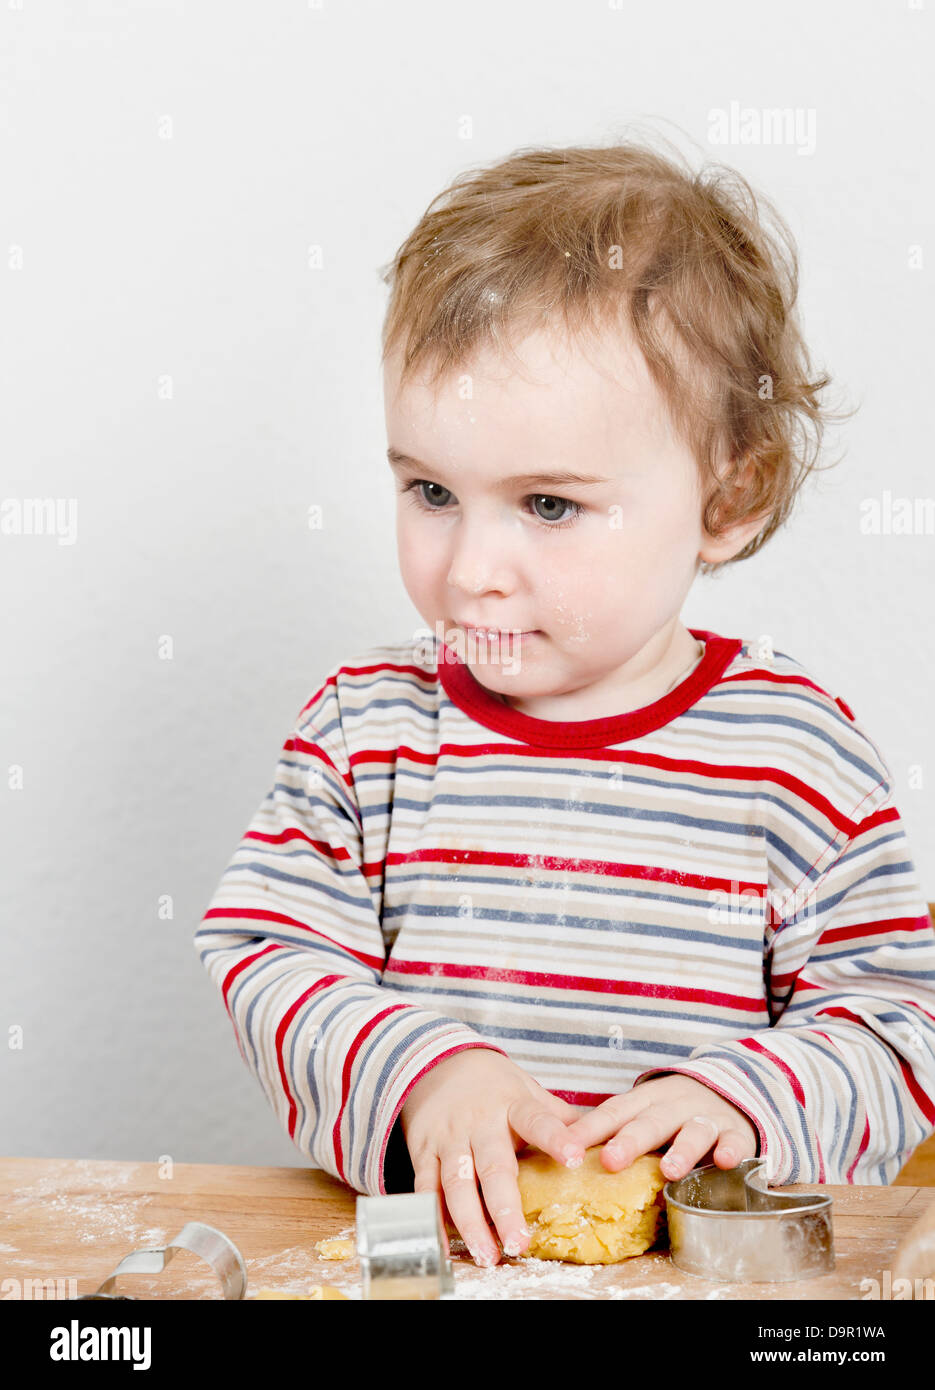 vertical image of 2 year old child making biscuit at wooden desk Stock Photo